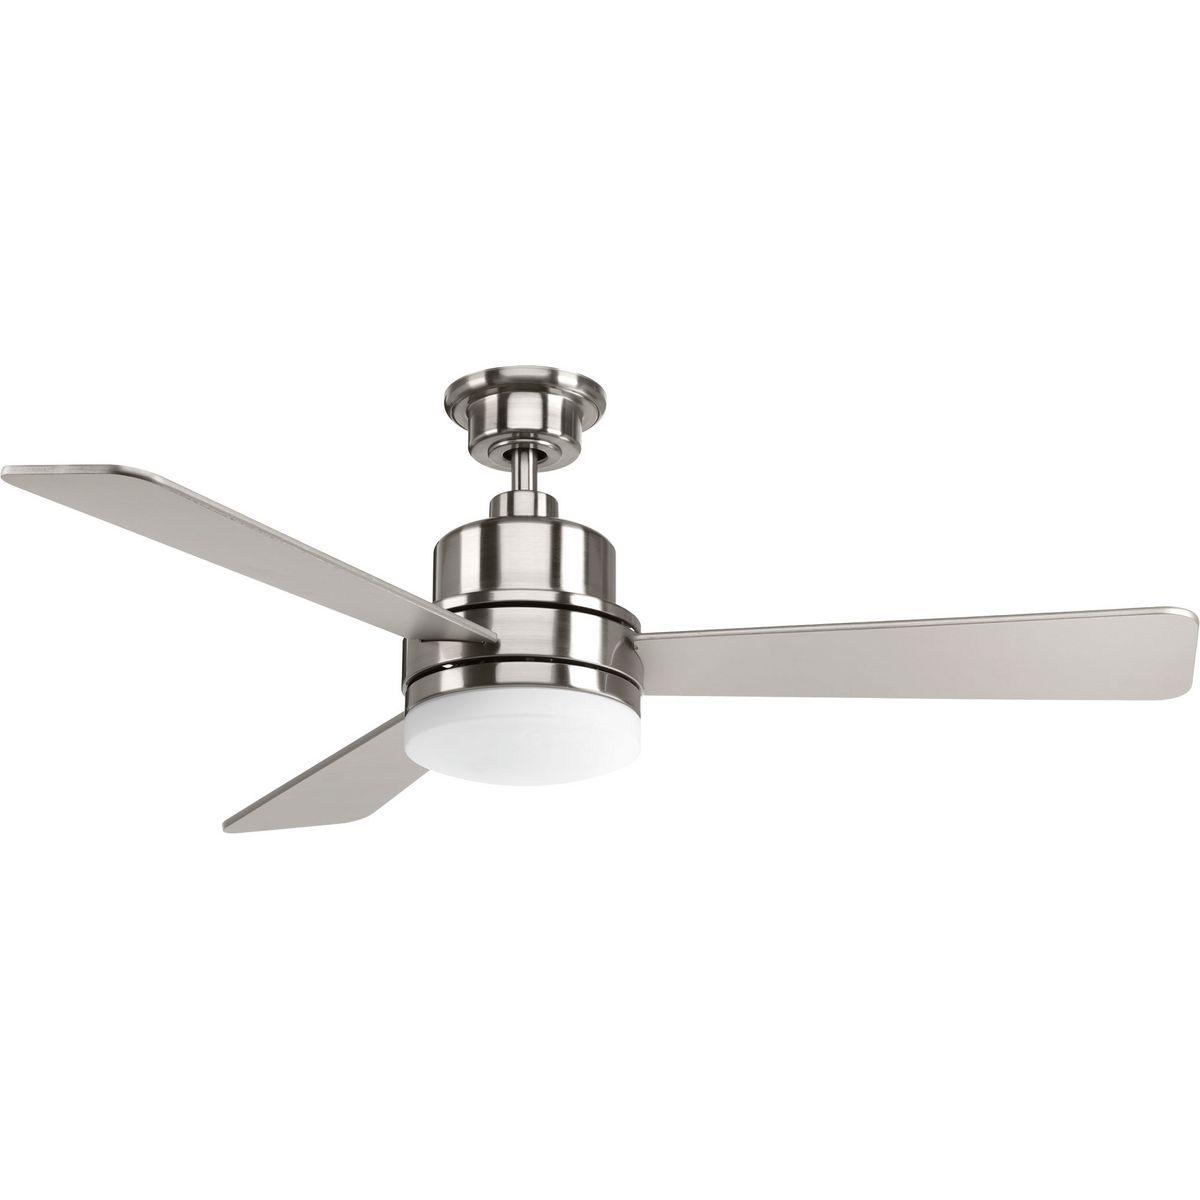 Hubbell P2556-0930K The 52 inch Trevina II features three silver blades in Brushed Nickel finish. Coolly modern, the Trevina II ceiling fan offers both form and function with an energy efficient 17W LED source with a 3000K-color temperature. Features a wall control switch.  